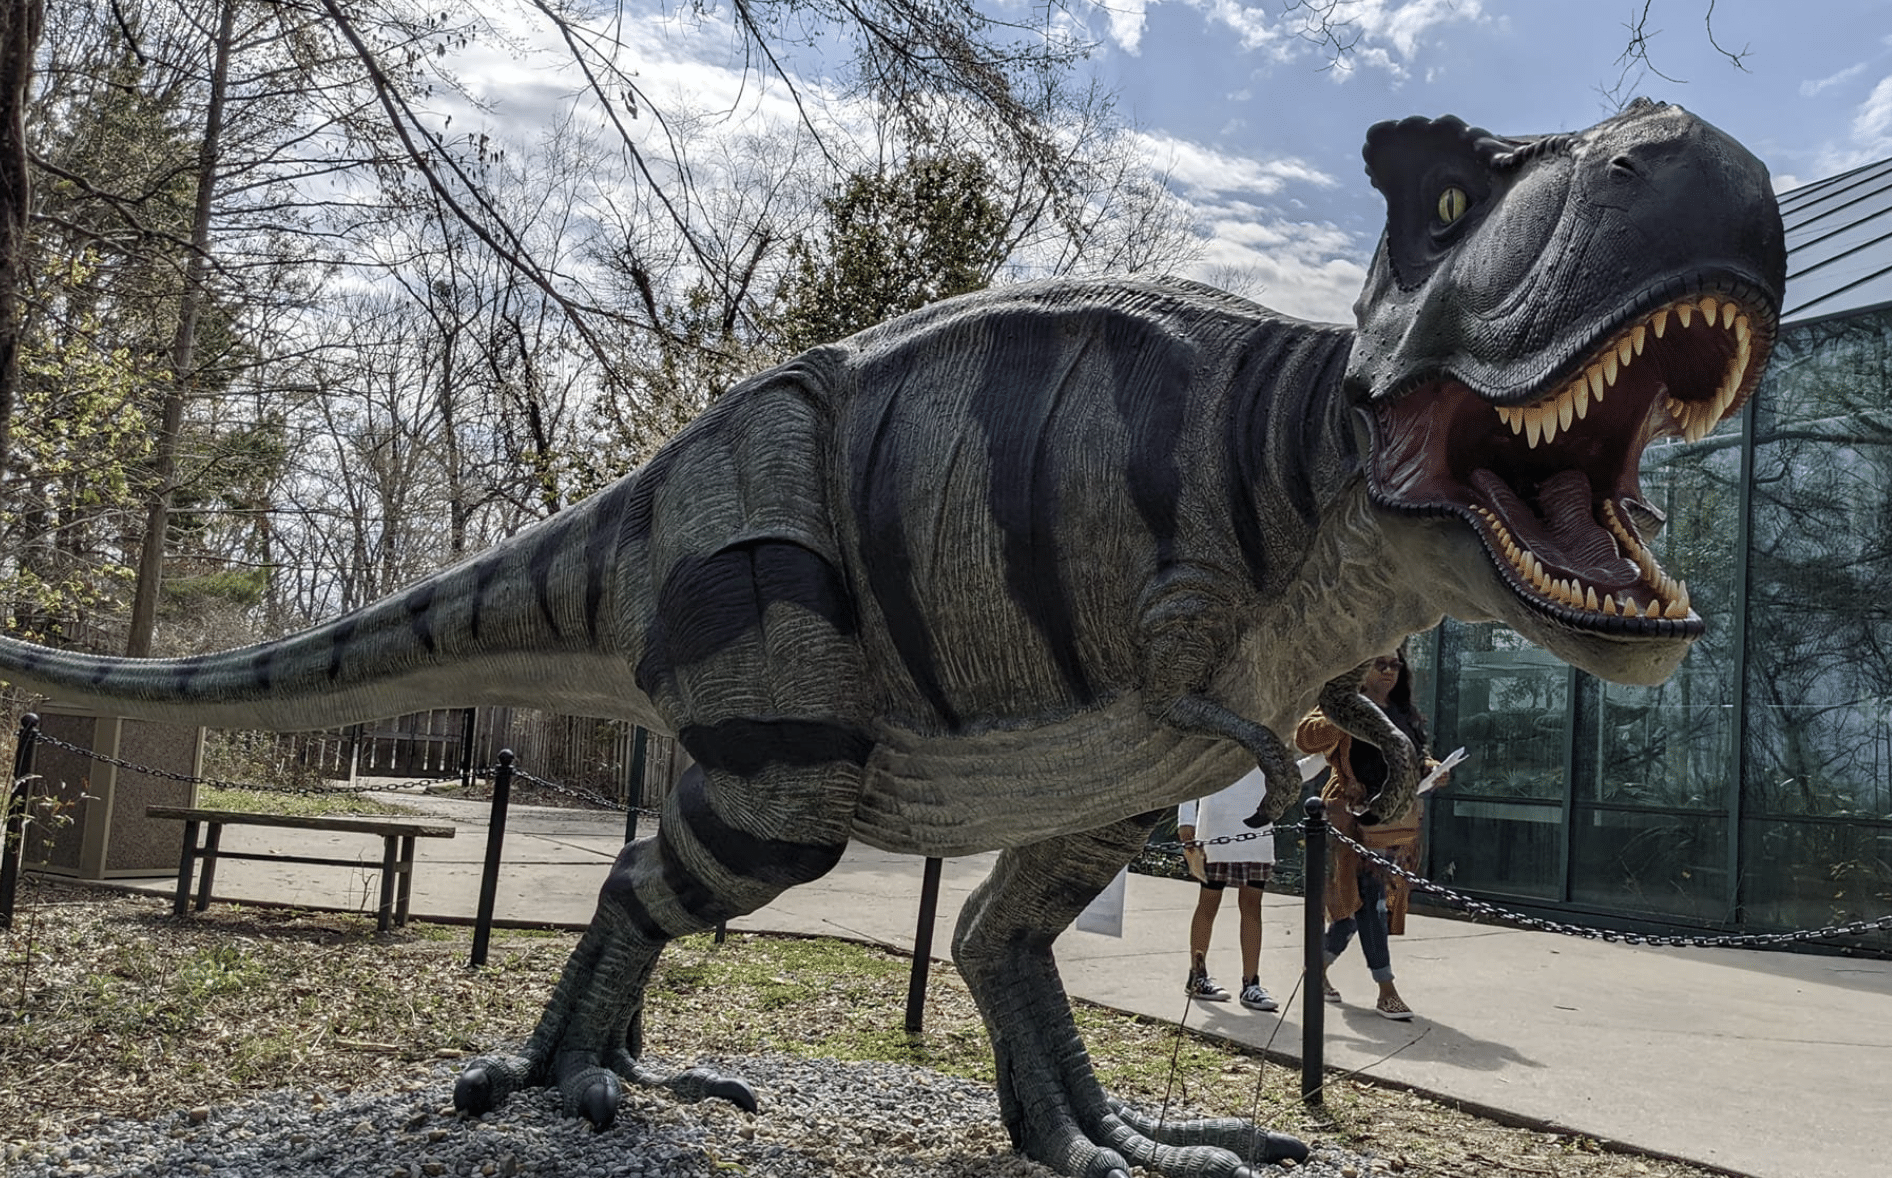 Mississippi Museum of Natural Science to Welcome Dinosaur Exhibit